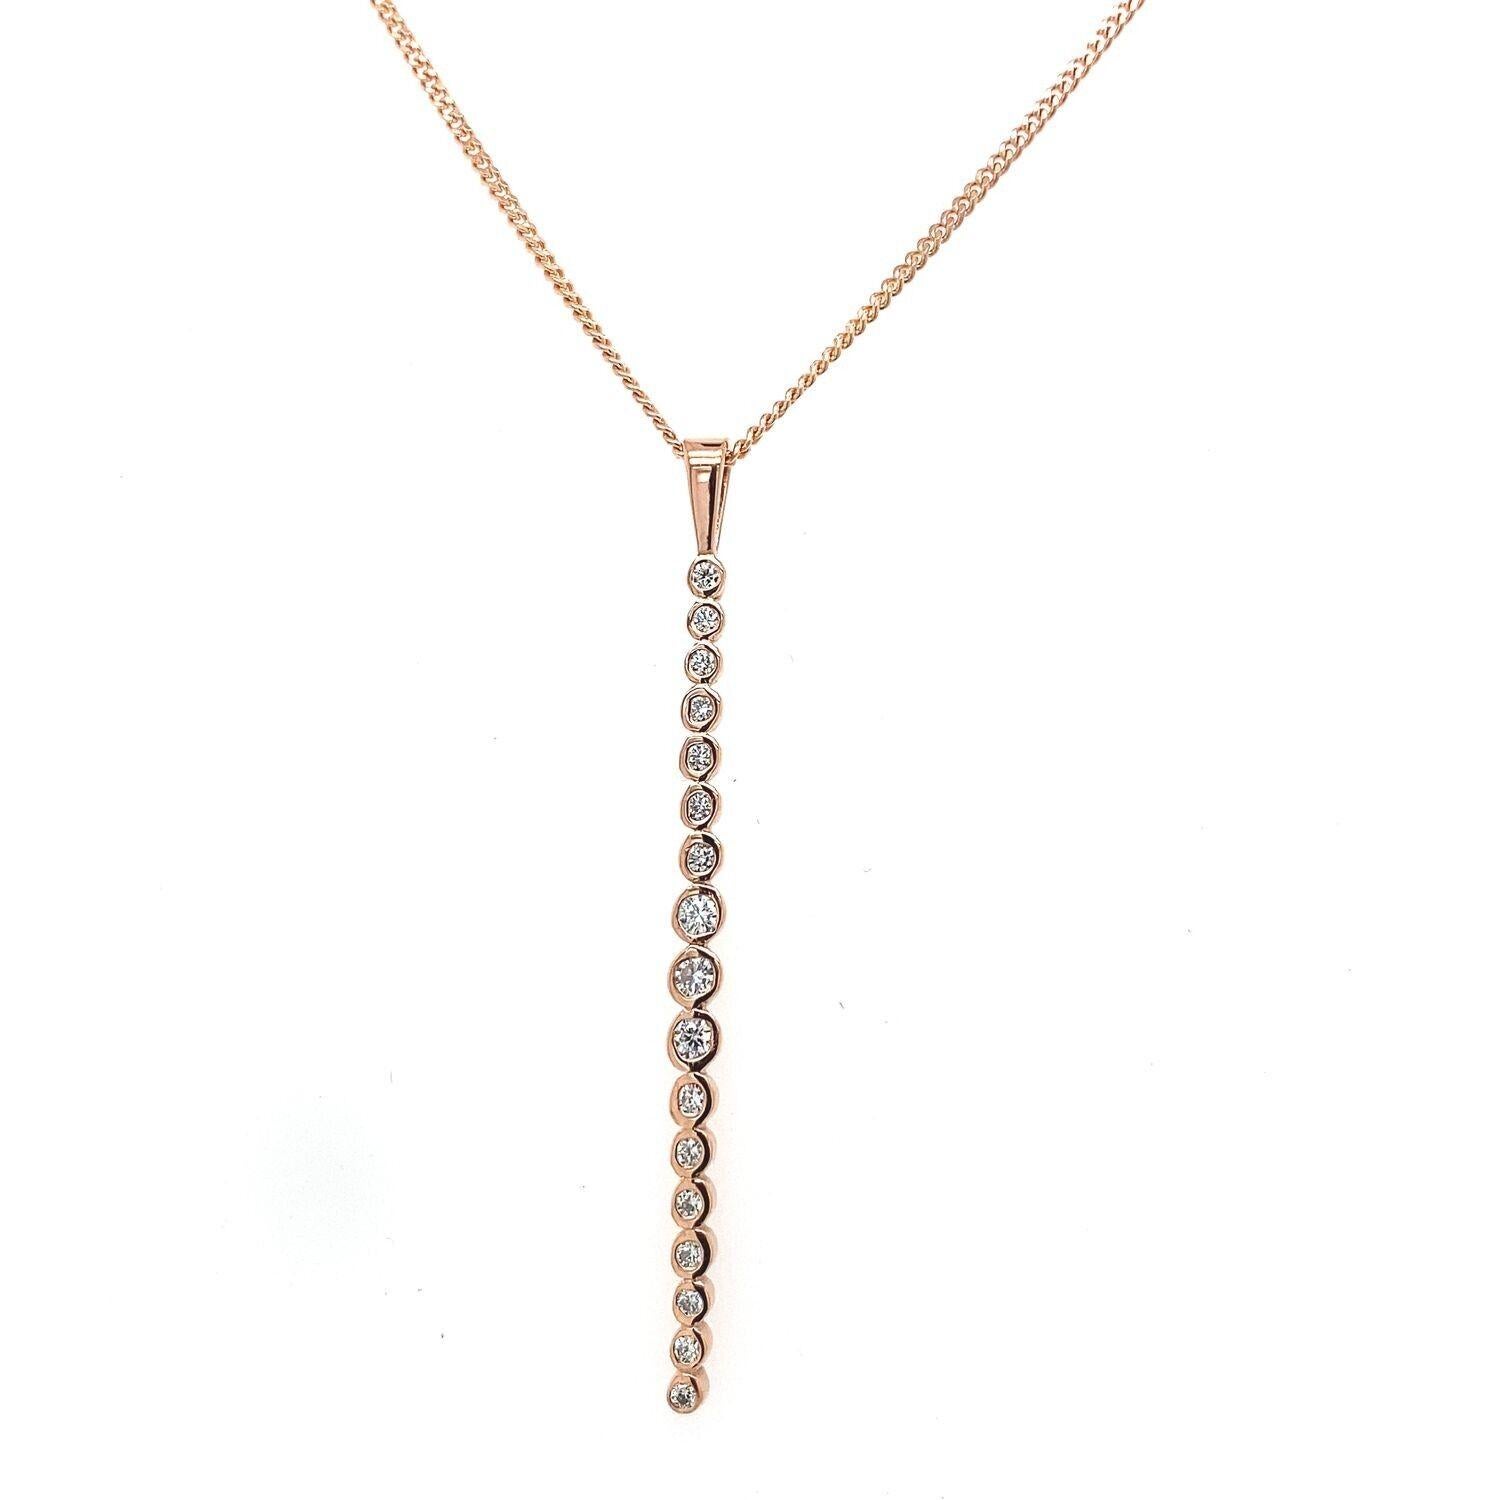 This beautiful Diamond drop pendant is set in a 9ct Rose Gold setting with 17 Round Brilliant Cut Diamonds, 0.40ct total Diamond weight, suspended from 16